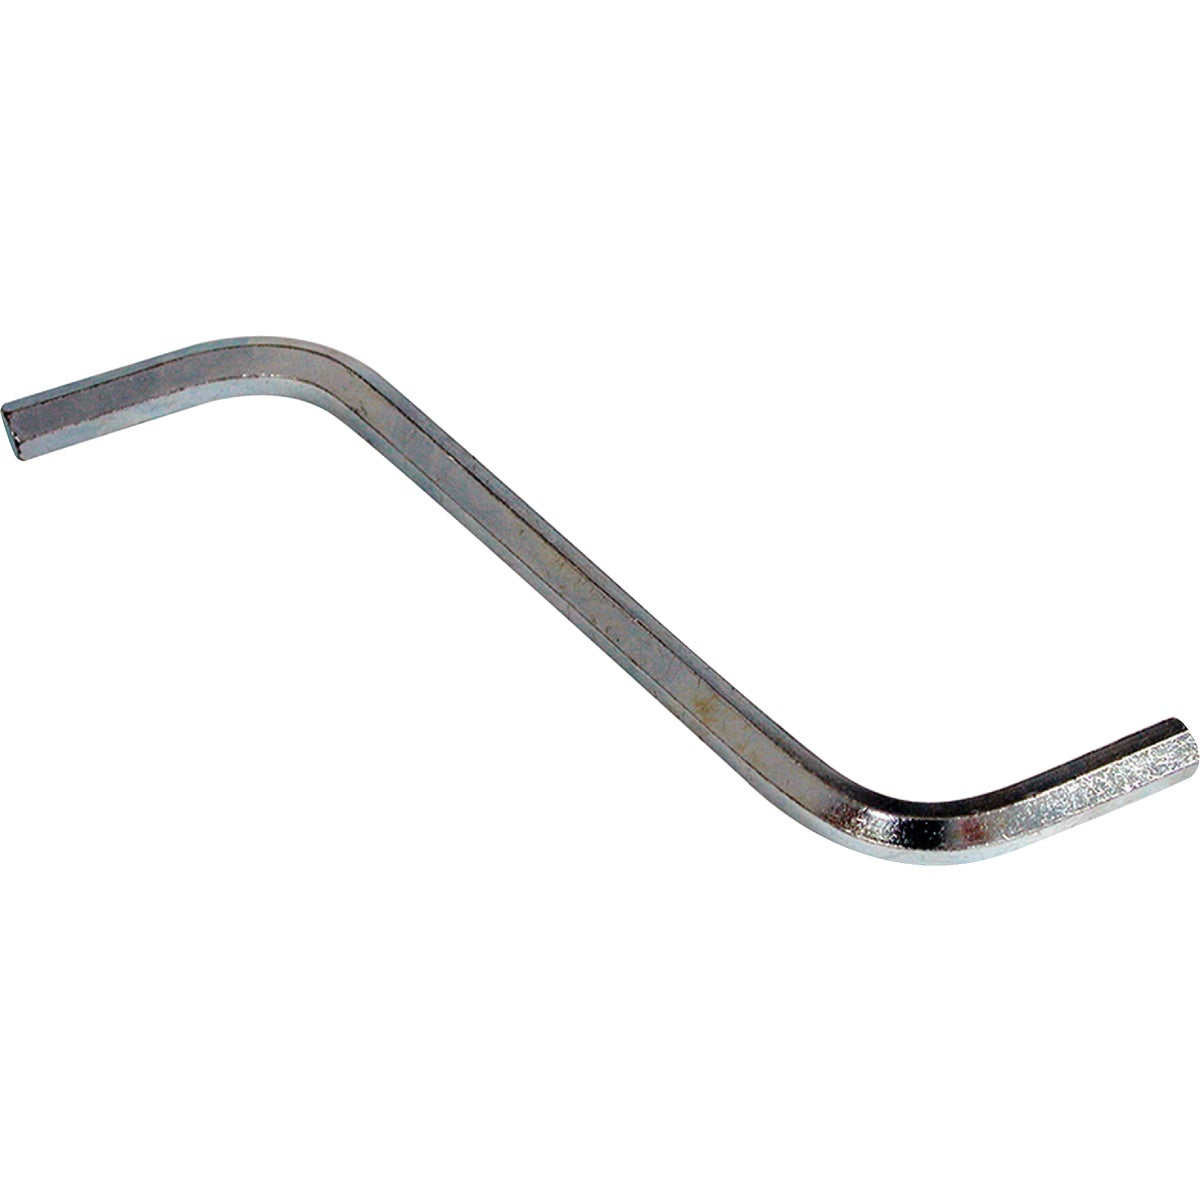 Item 404893, Garbage disposal de-jammer wrench is used to install garbage disposals.